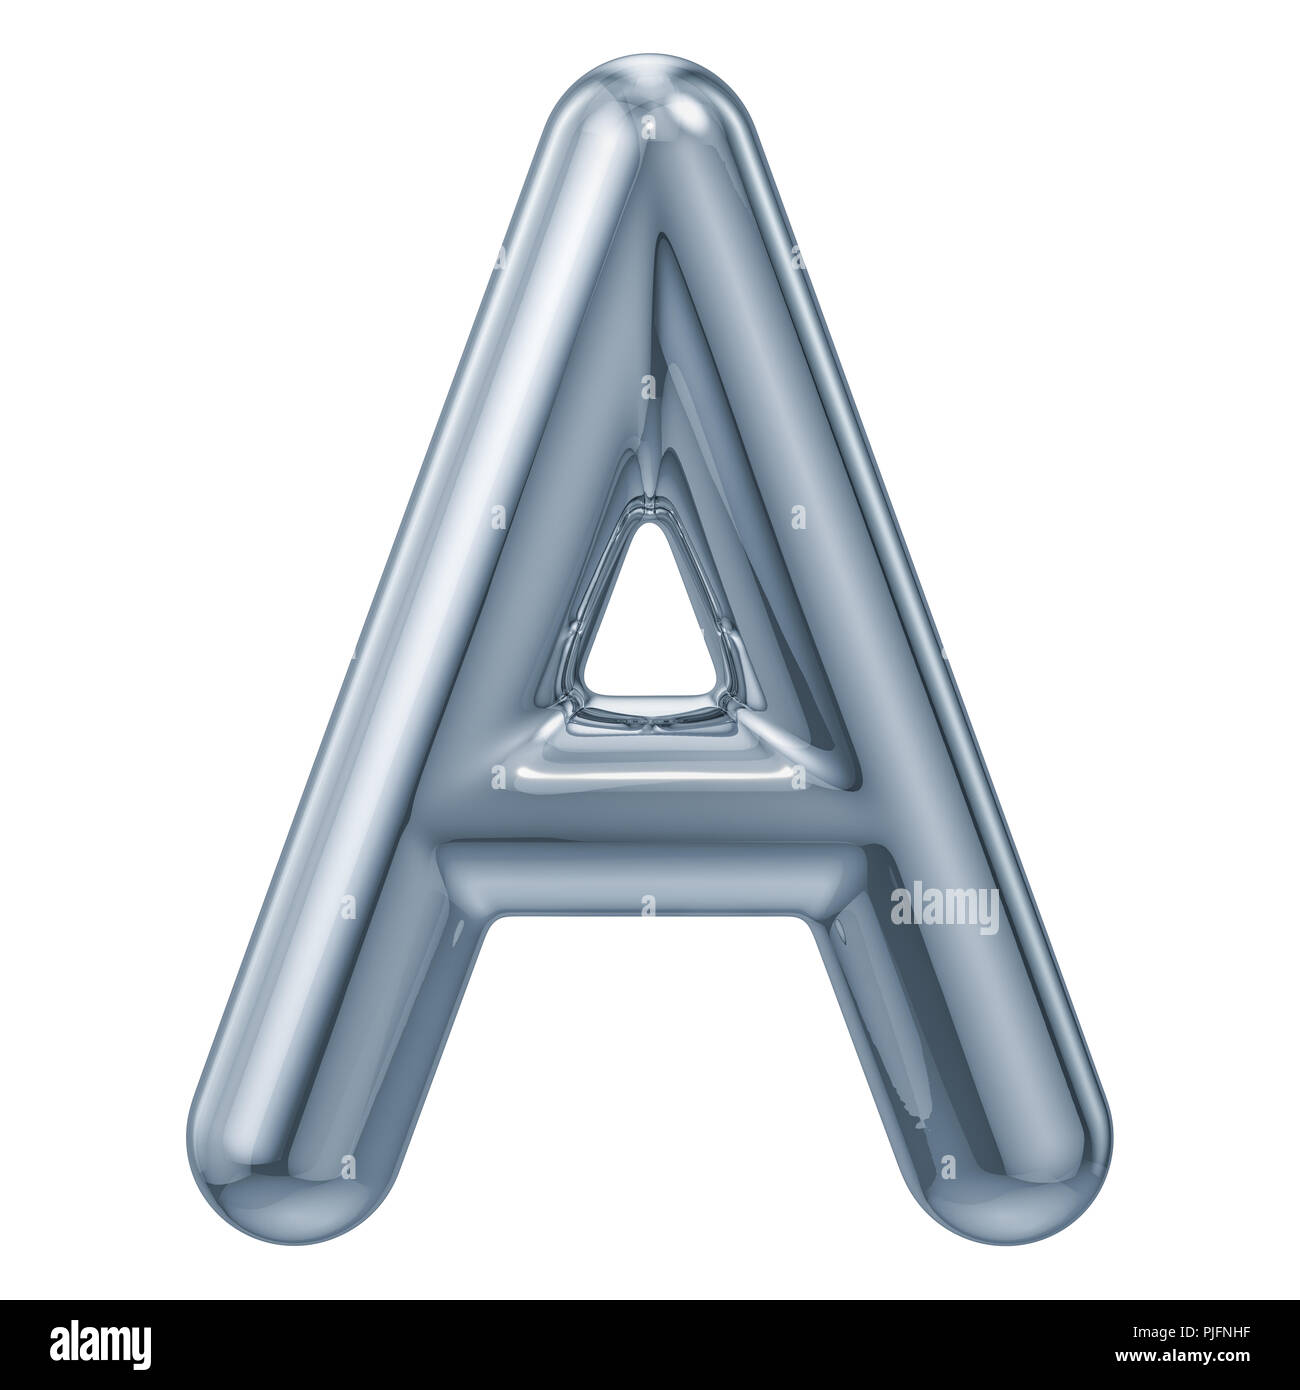 English metallic letter A, 3D rendering isolated on white background Stock Photo